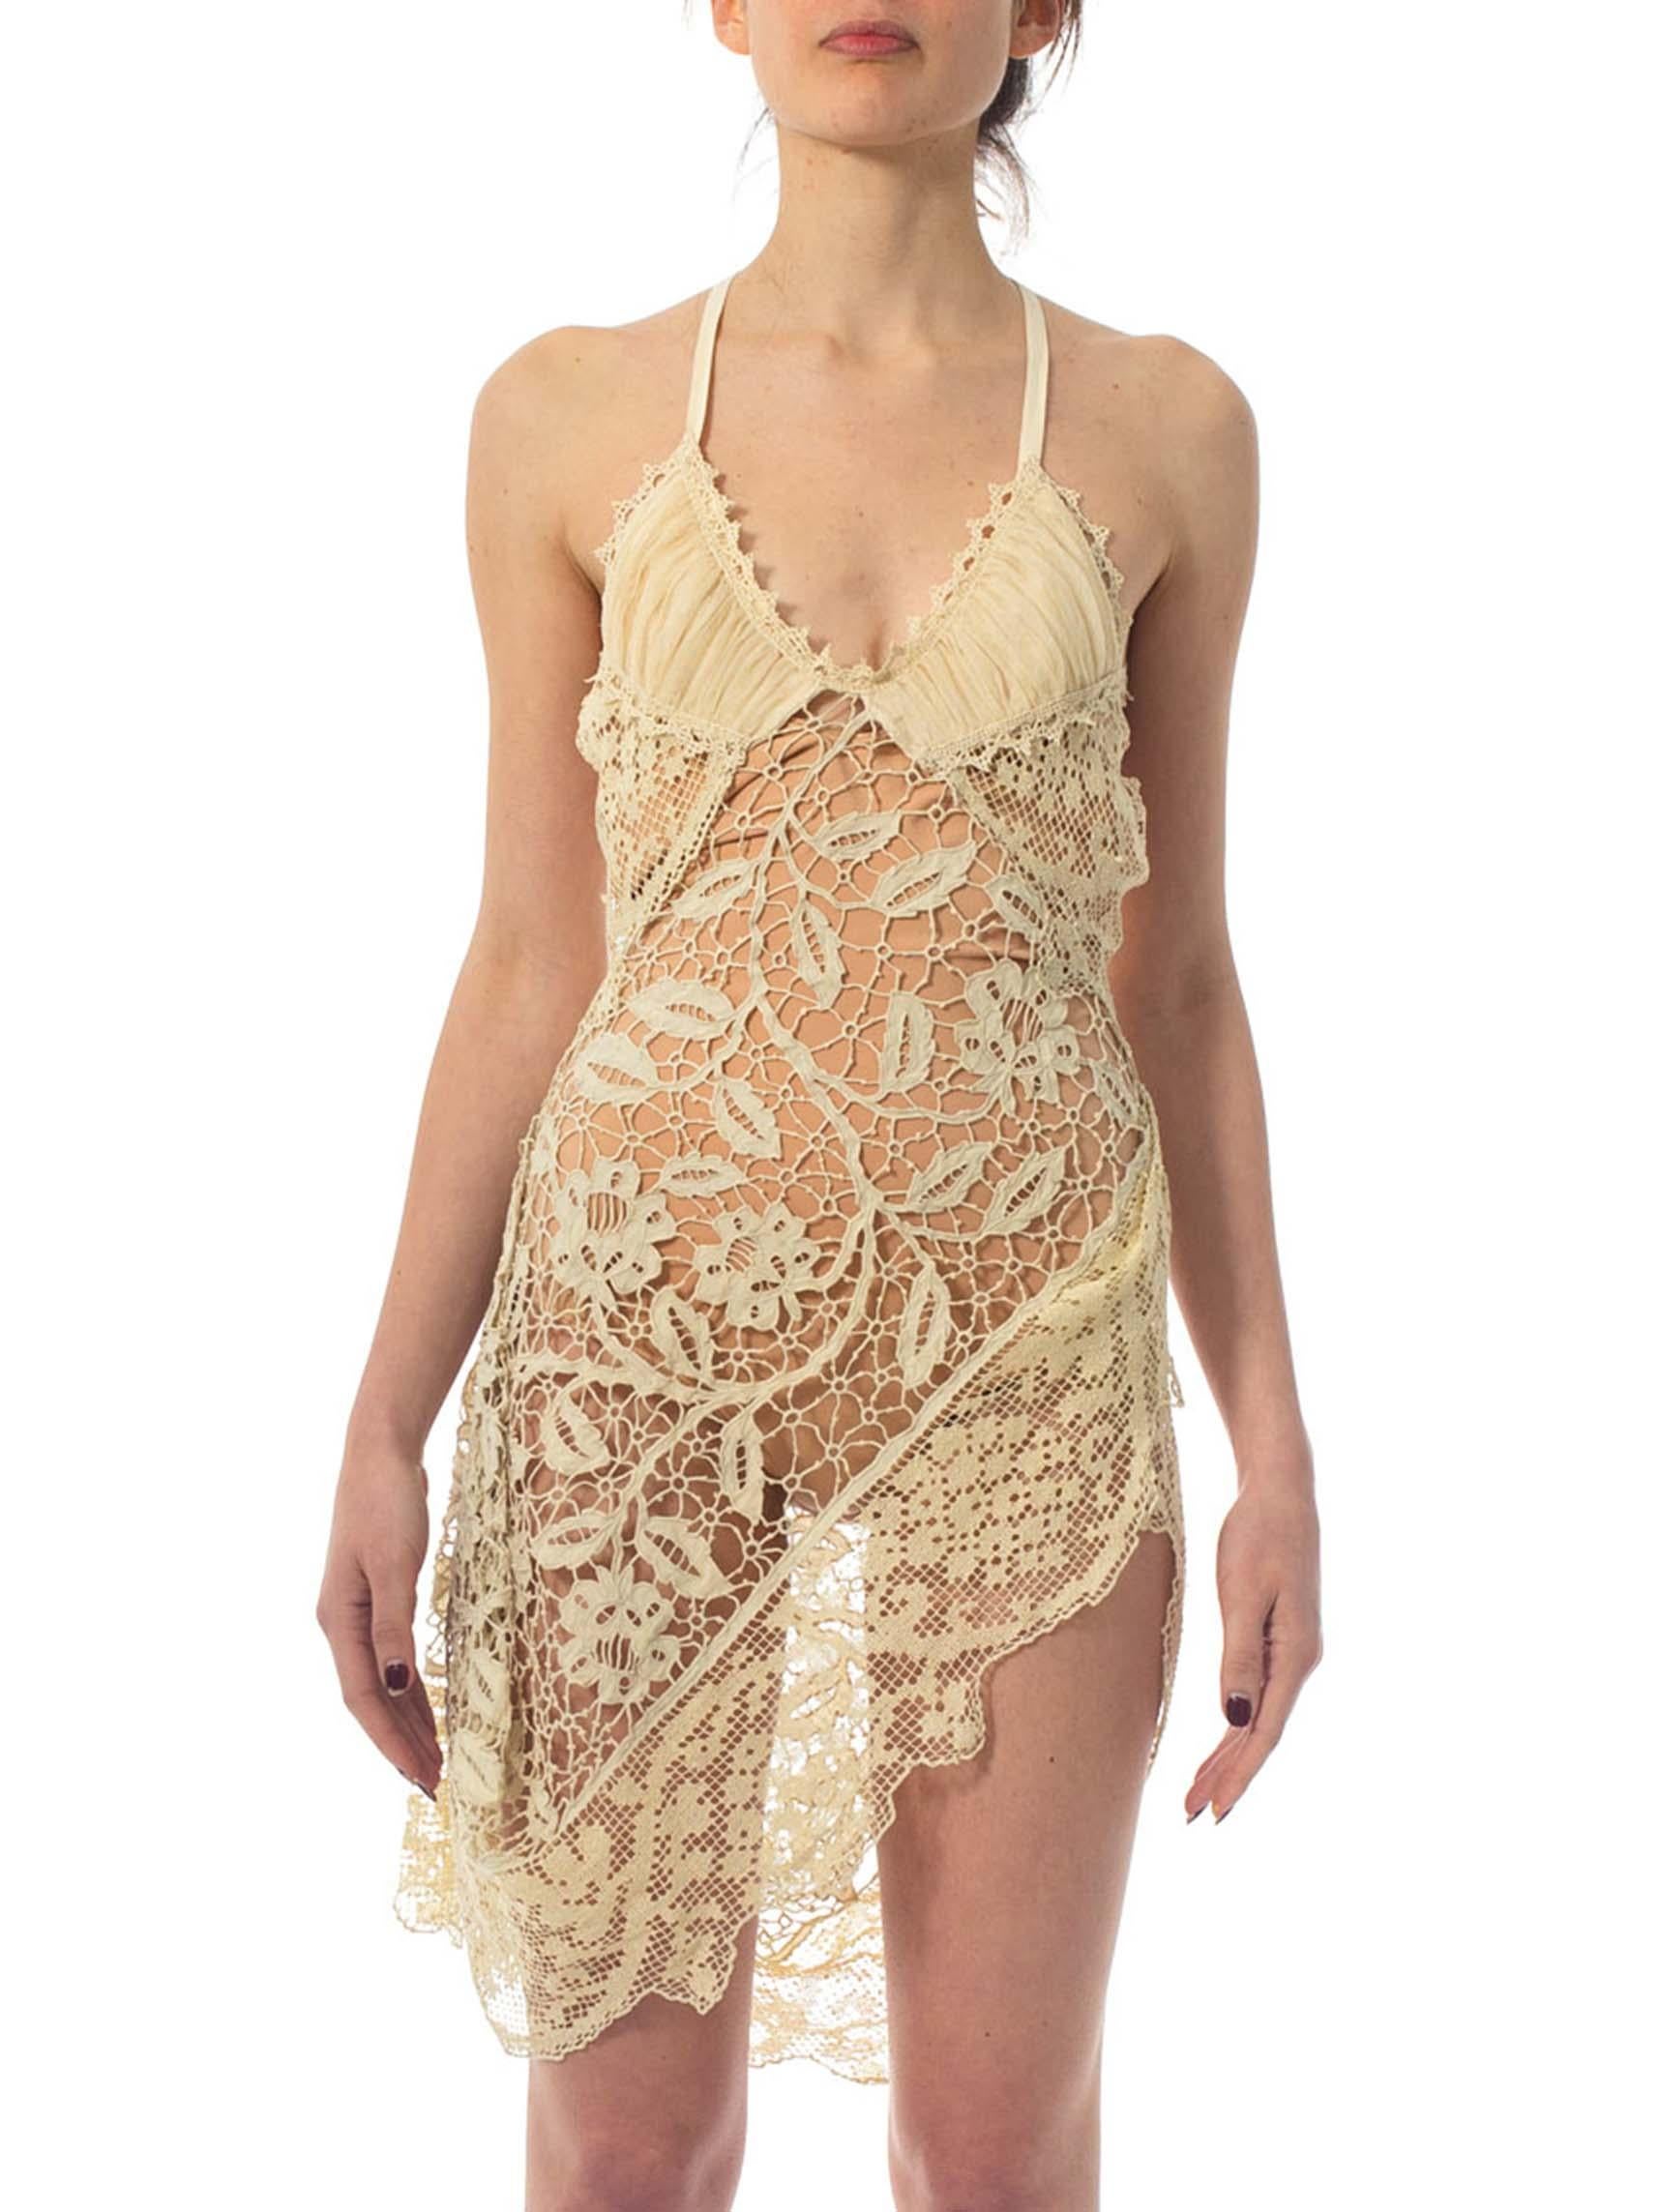 MORPHEW COLLECTION Creme Dress Made From 100 Year Old Handmade Lace
MORPHEW COLLECTION is made entirely by hand in our NYC Ateliér of rare antique materials sourced from around the globe. Our sustainable vintage materials represent over a century of